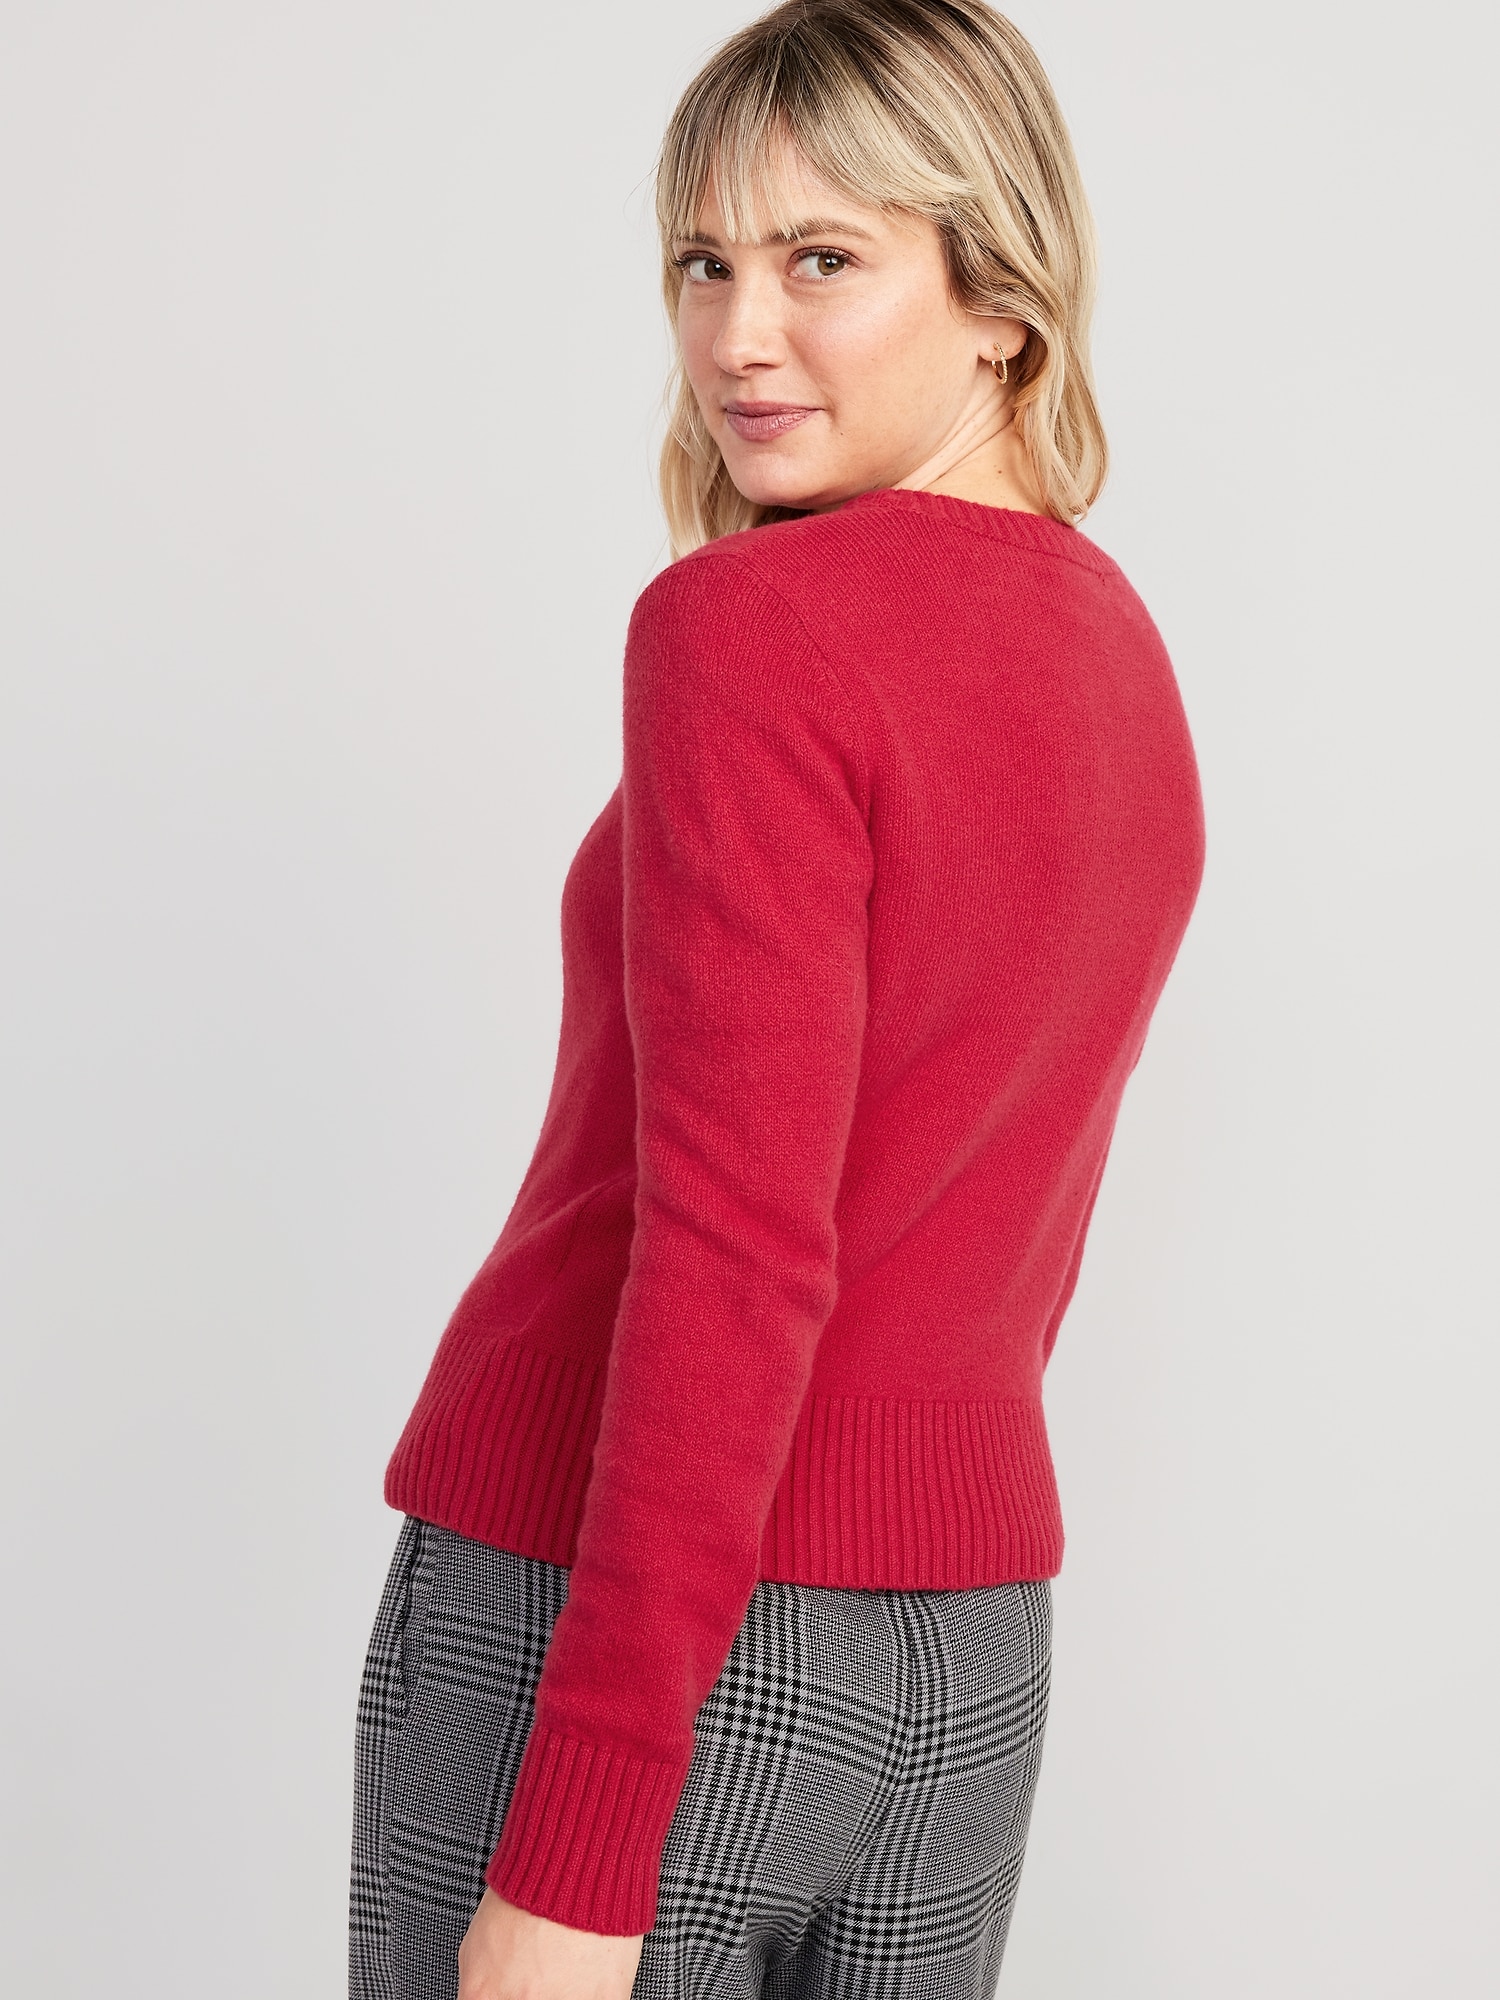 SoSoft Crew-Neck Sweater for Women | Old Navy